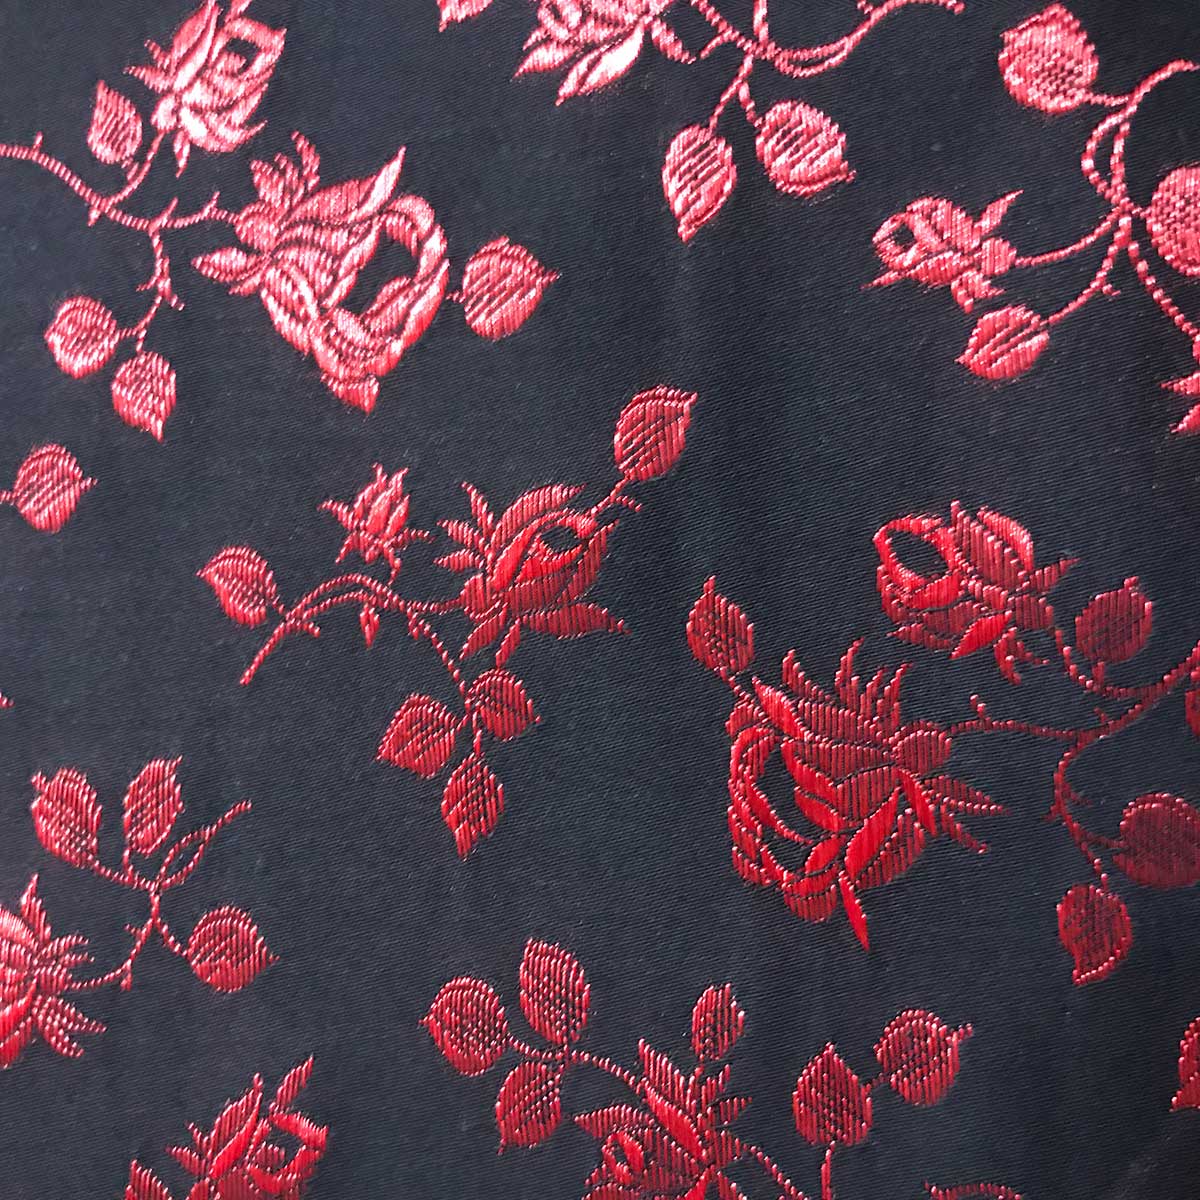 Coutil - Black and Red Brocade Corseting Fabric, order in 1/2 yard ...